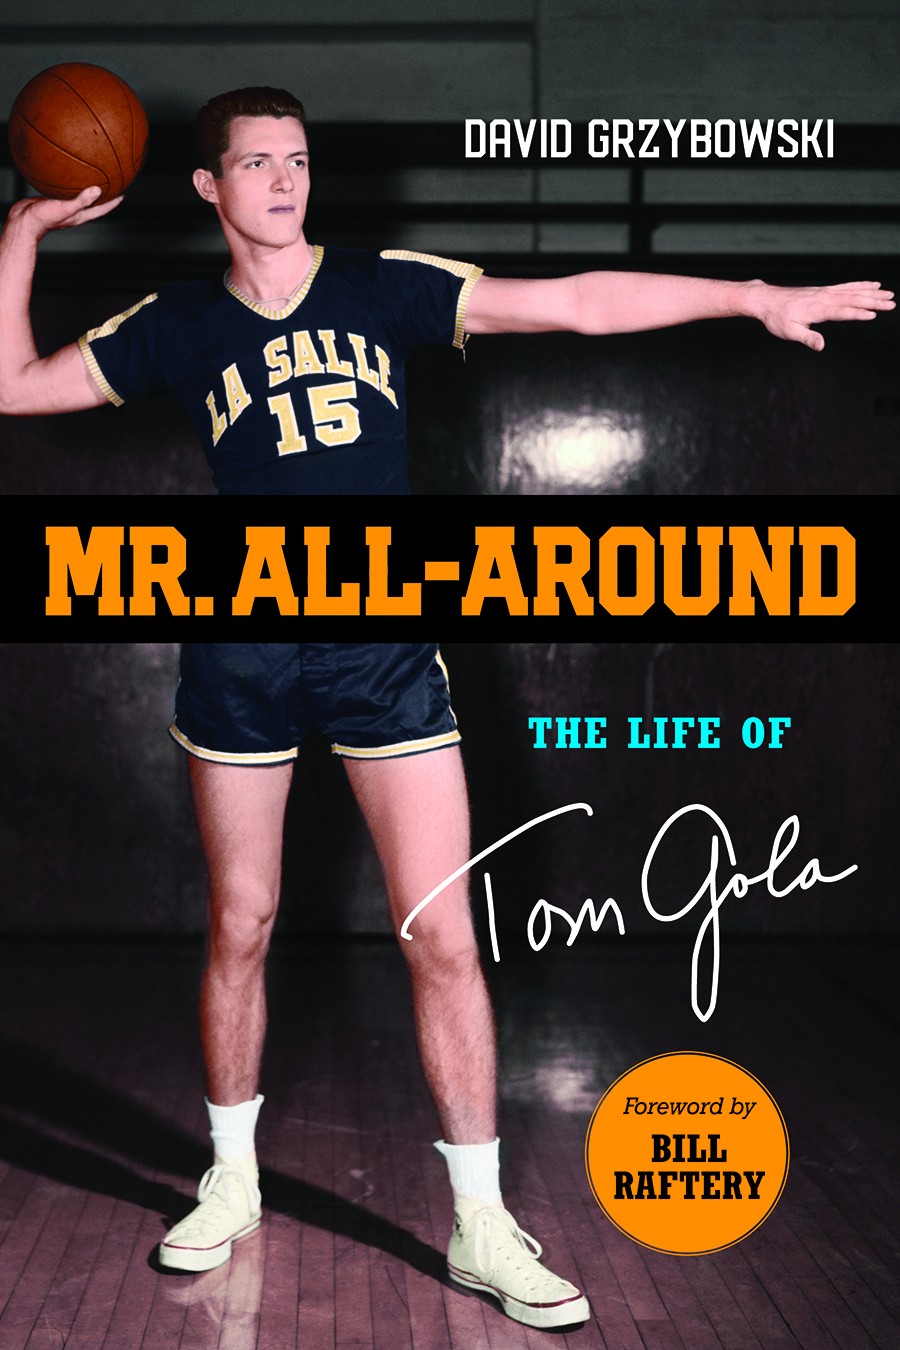 Mr. All-Around: A Review of the Tom Gola Biography